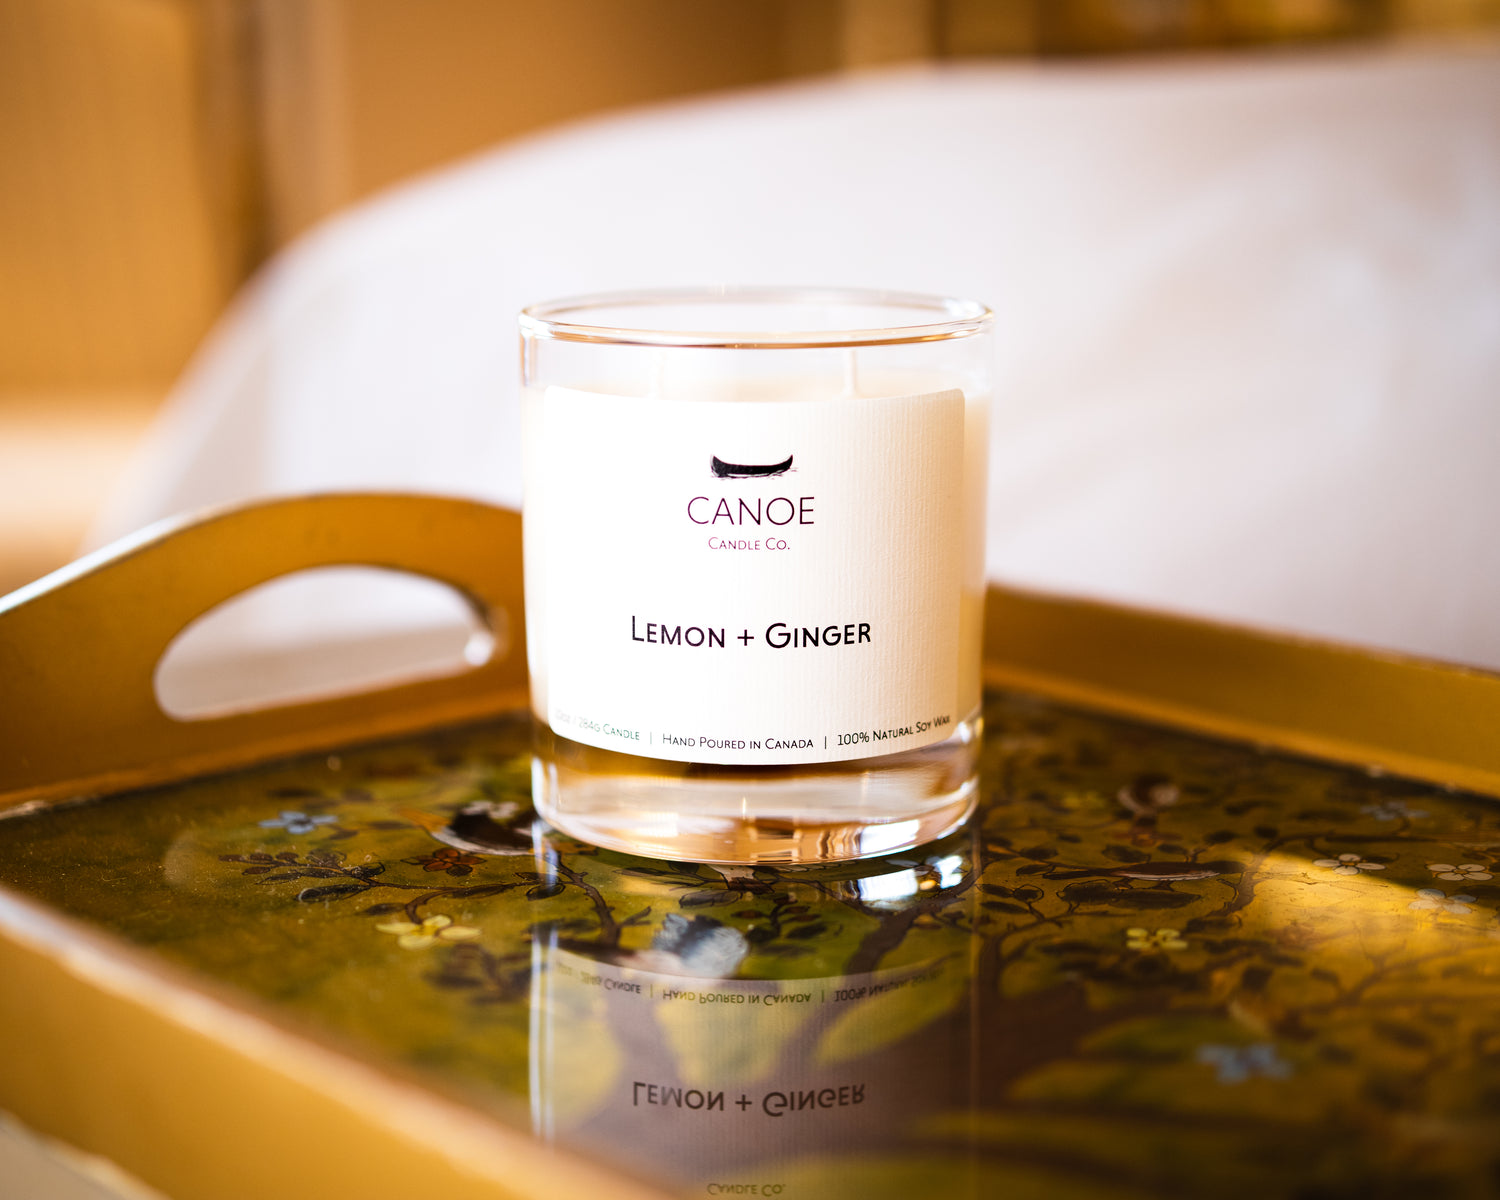 CANOE Candle Co.'s Lemon + Ginger 10oz soy wax candle on a tray in a bedroom with white linen sheets in the background.